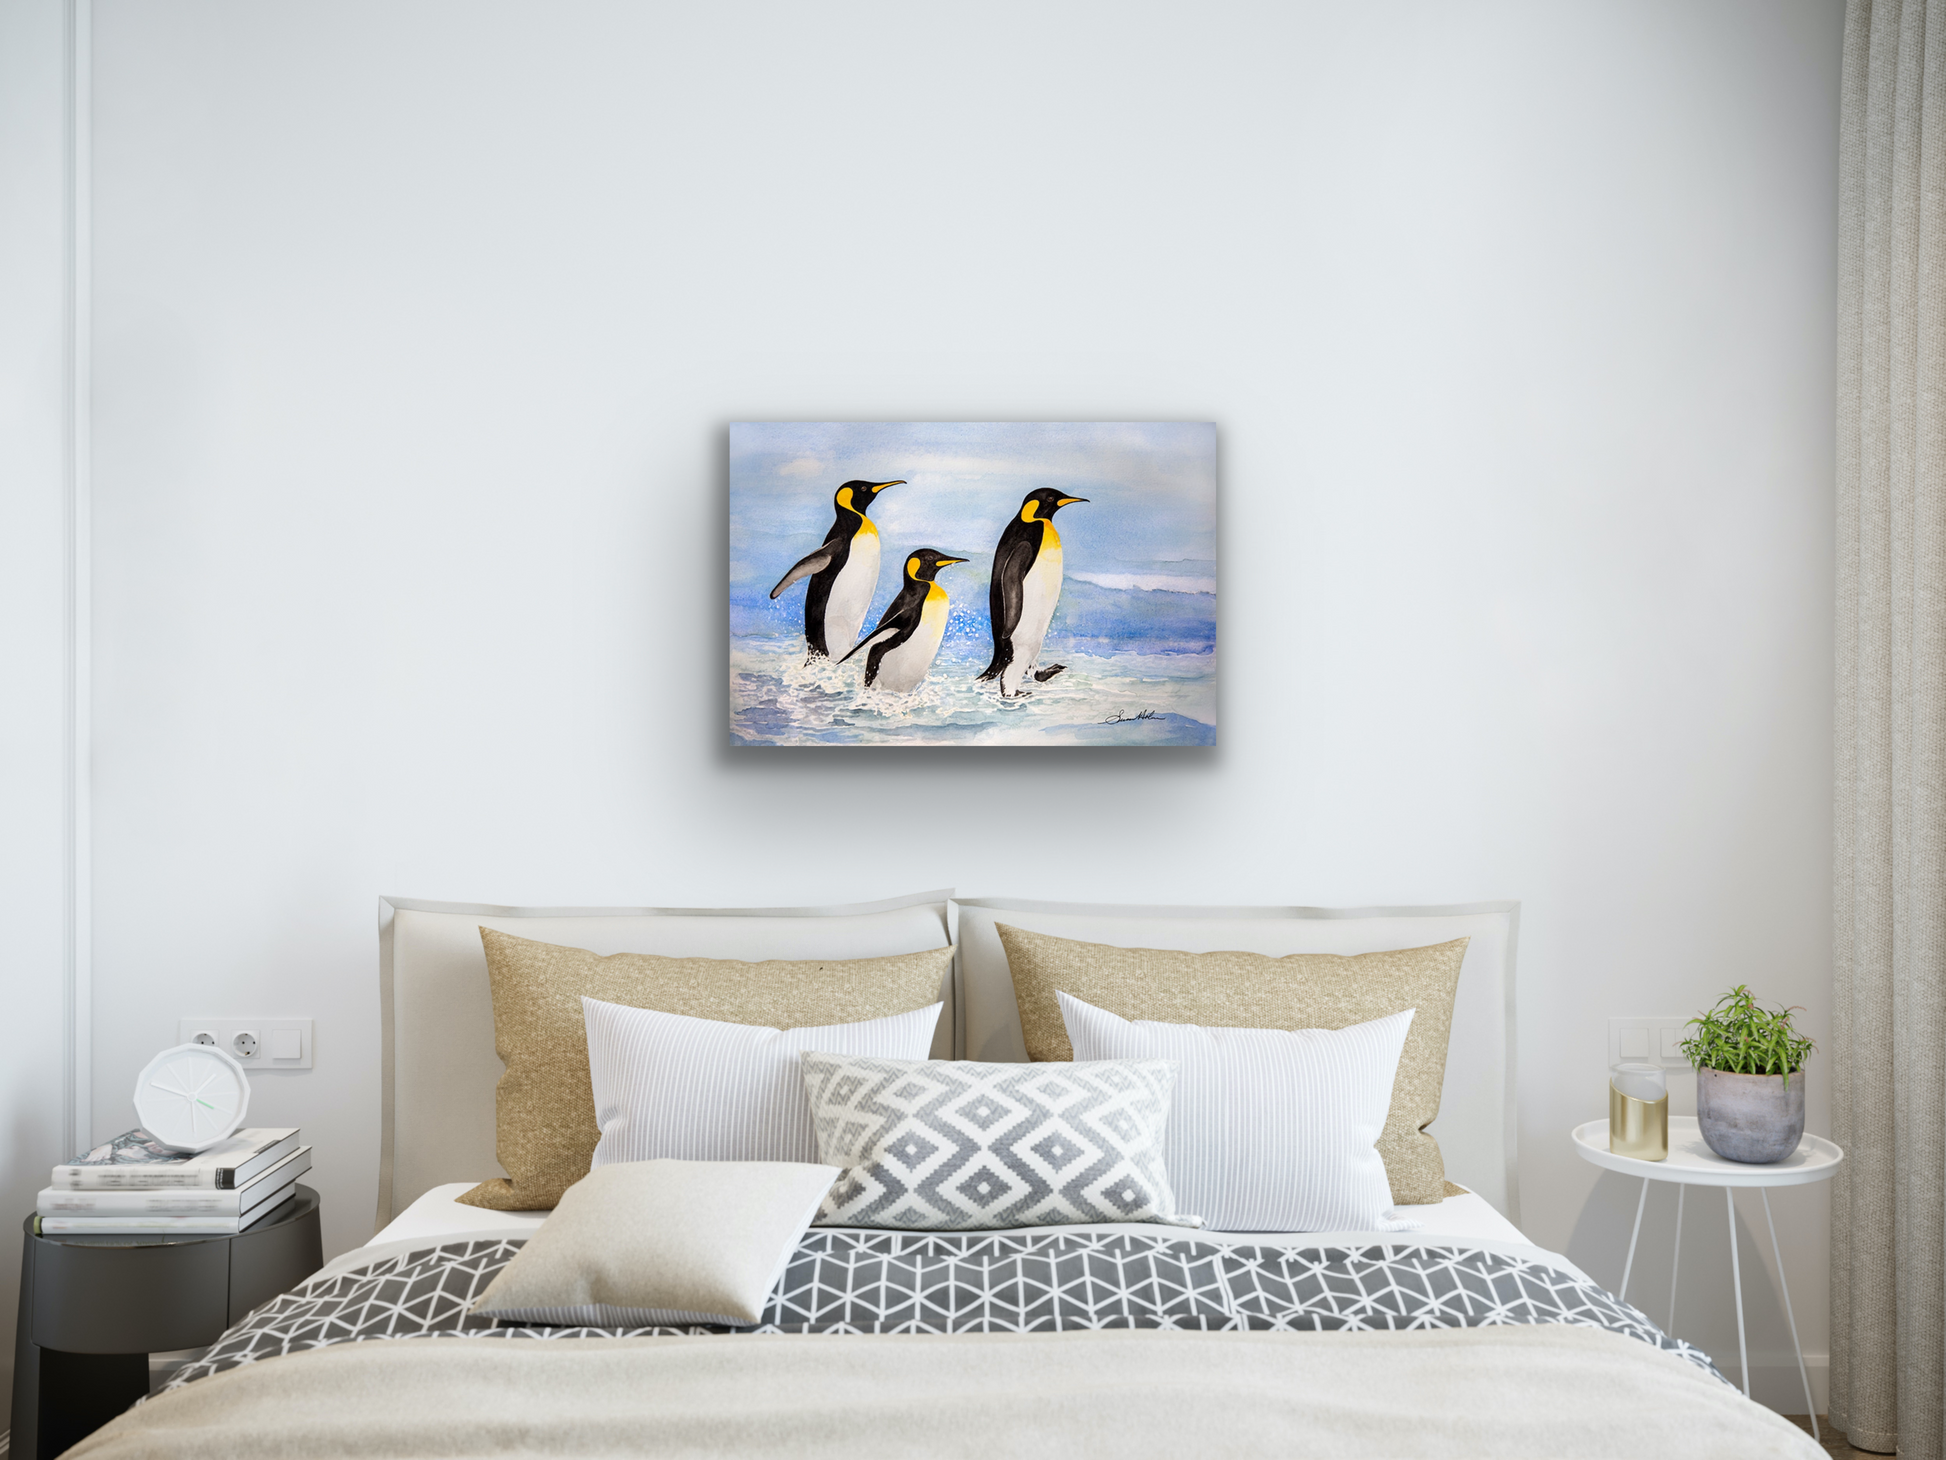 "Spashing" artwork depicts some cute penguins playing in the waves.